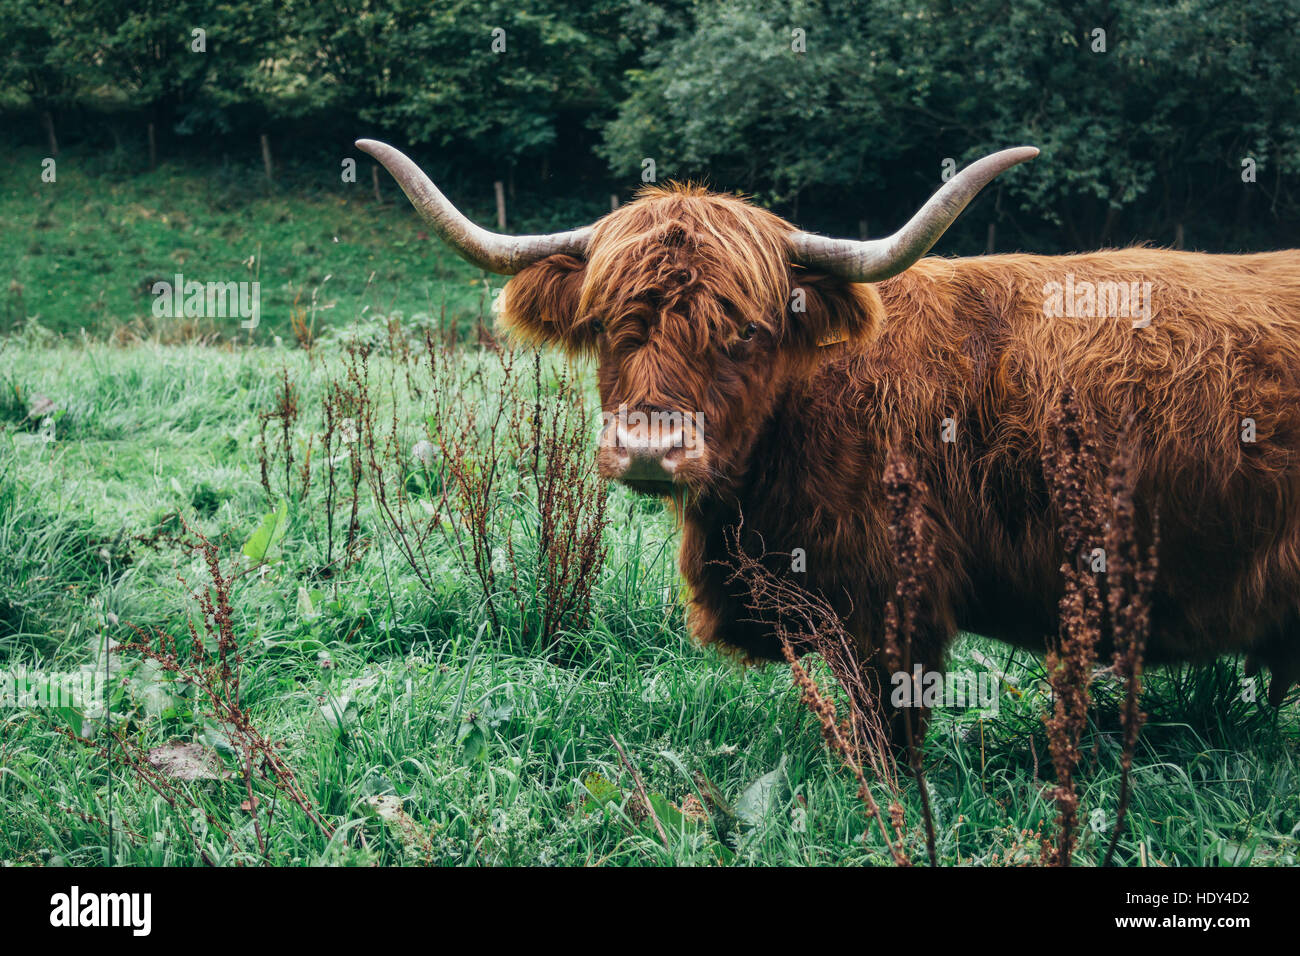 A portrait of a brown Scottish cattle highland cow. Stock Photo